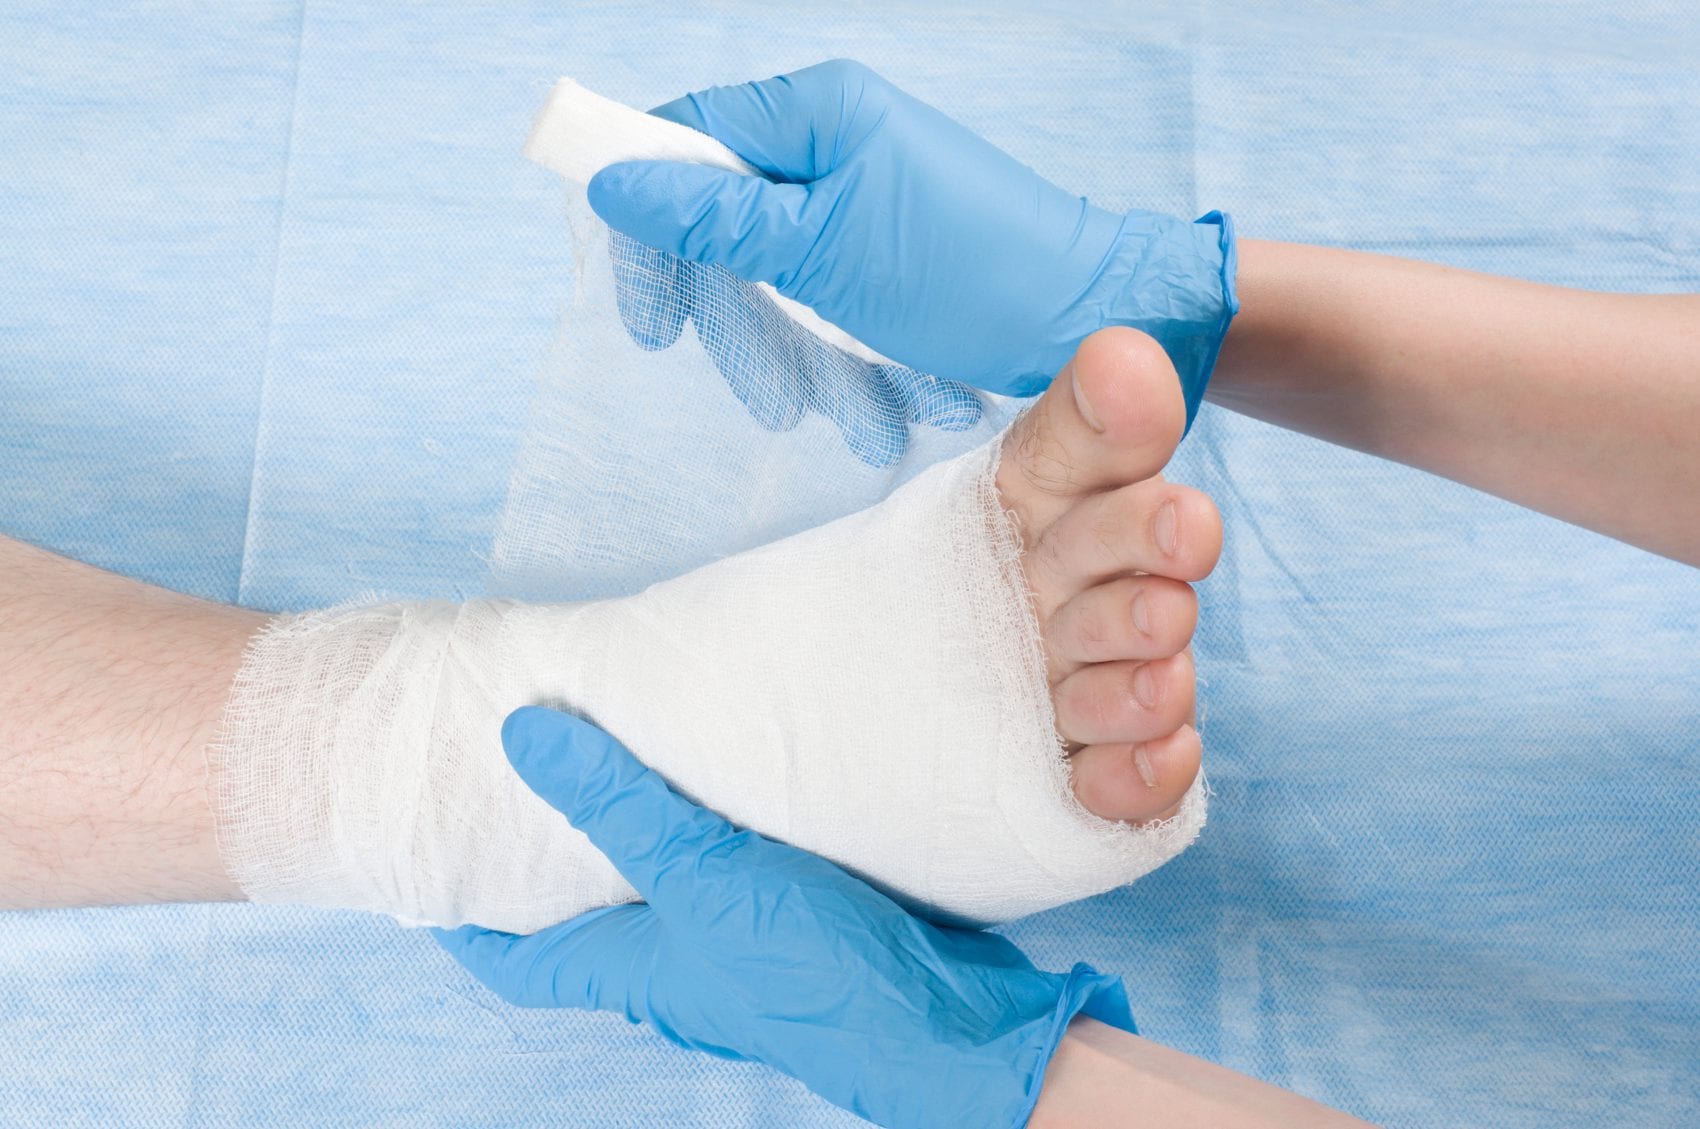 A foot being bandaged for a wound